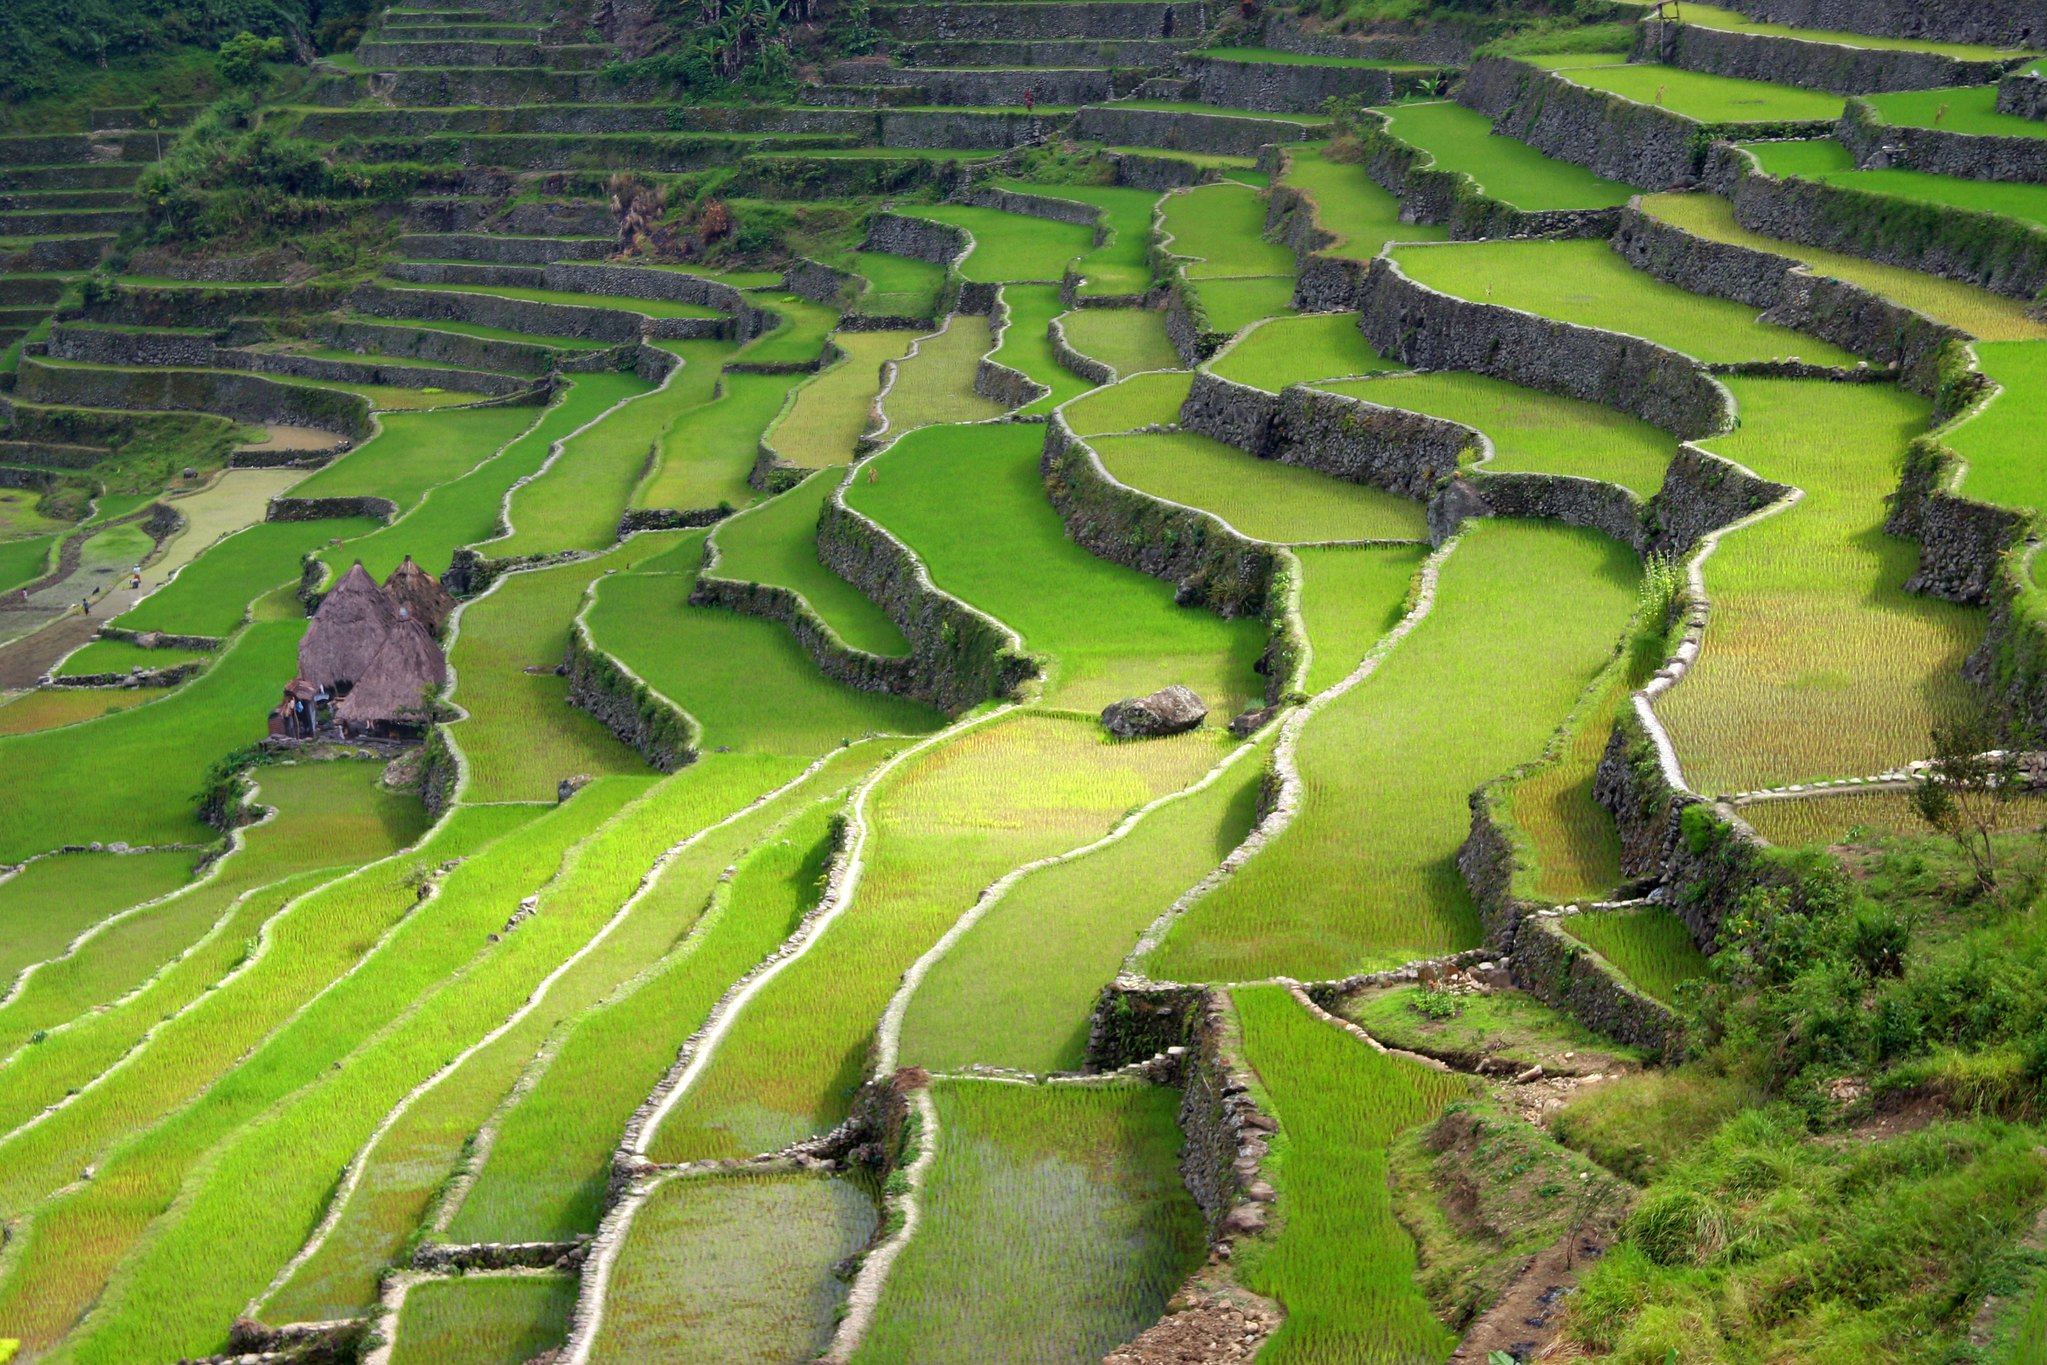 Banaue Rice Terraces in the Philippines